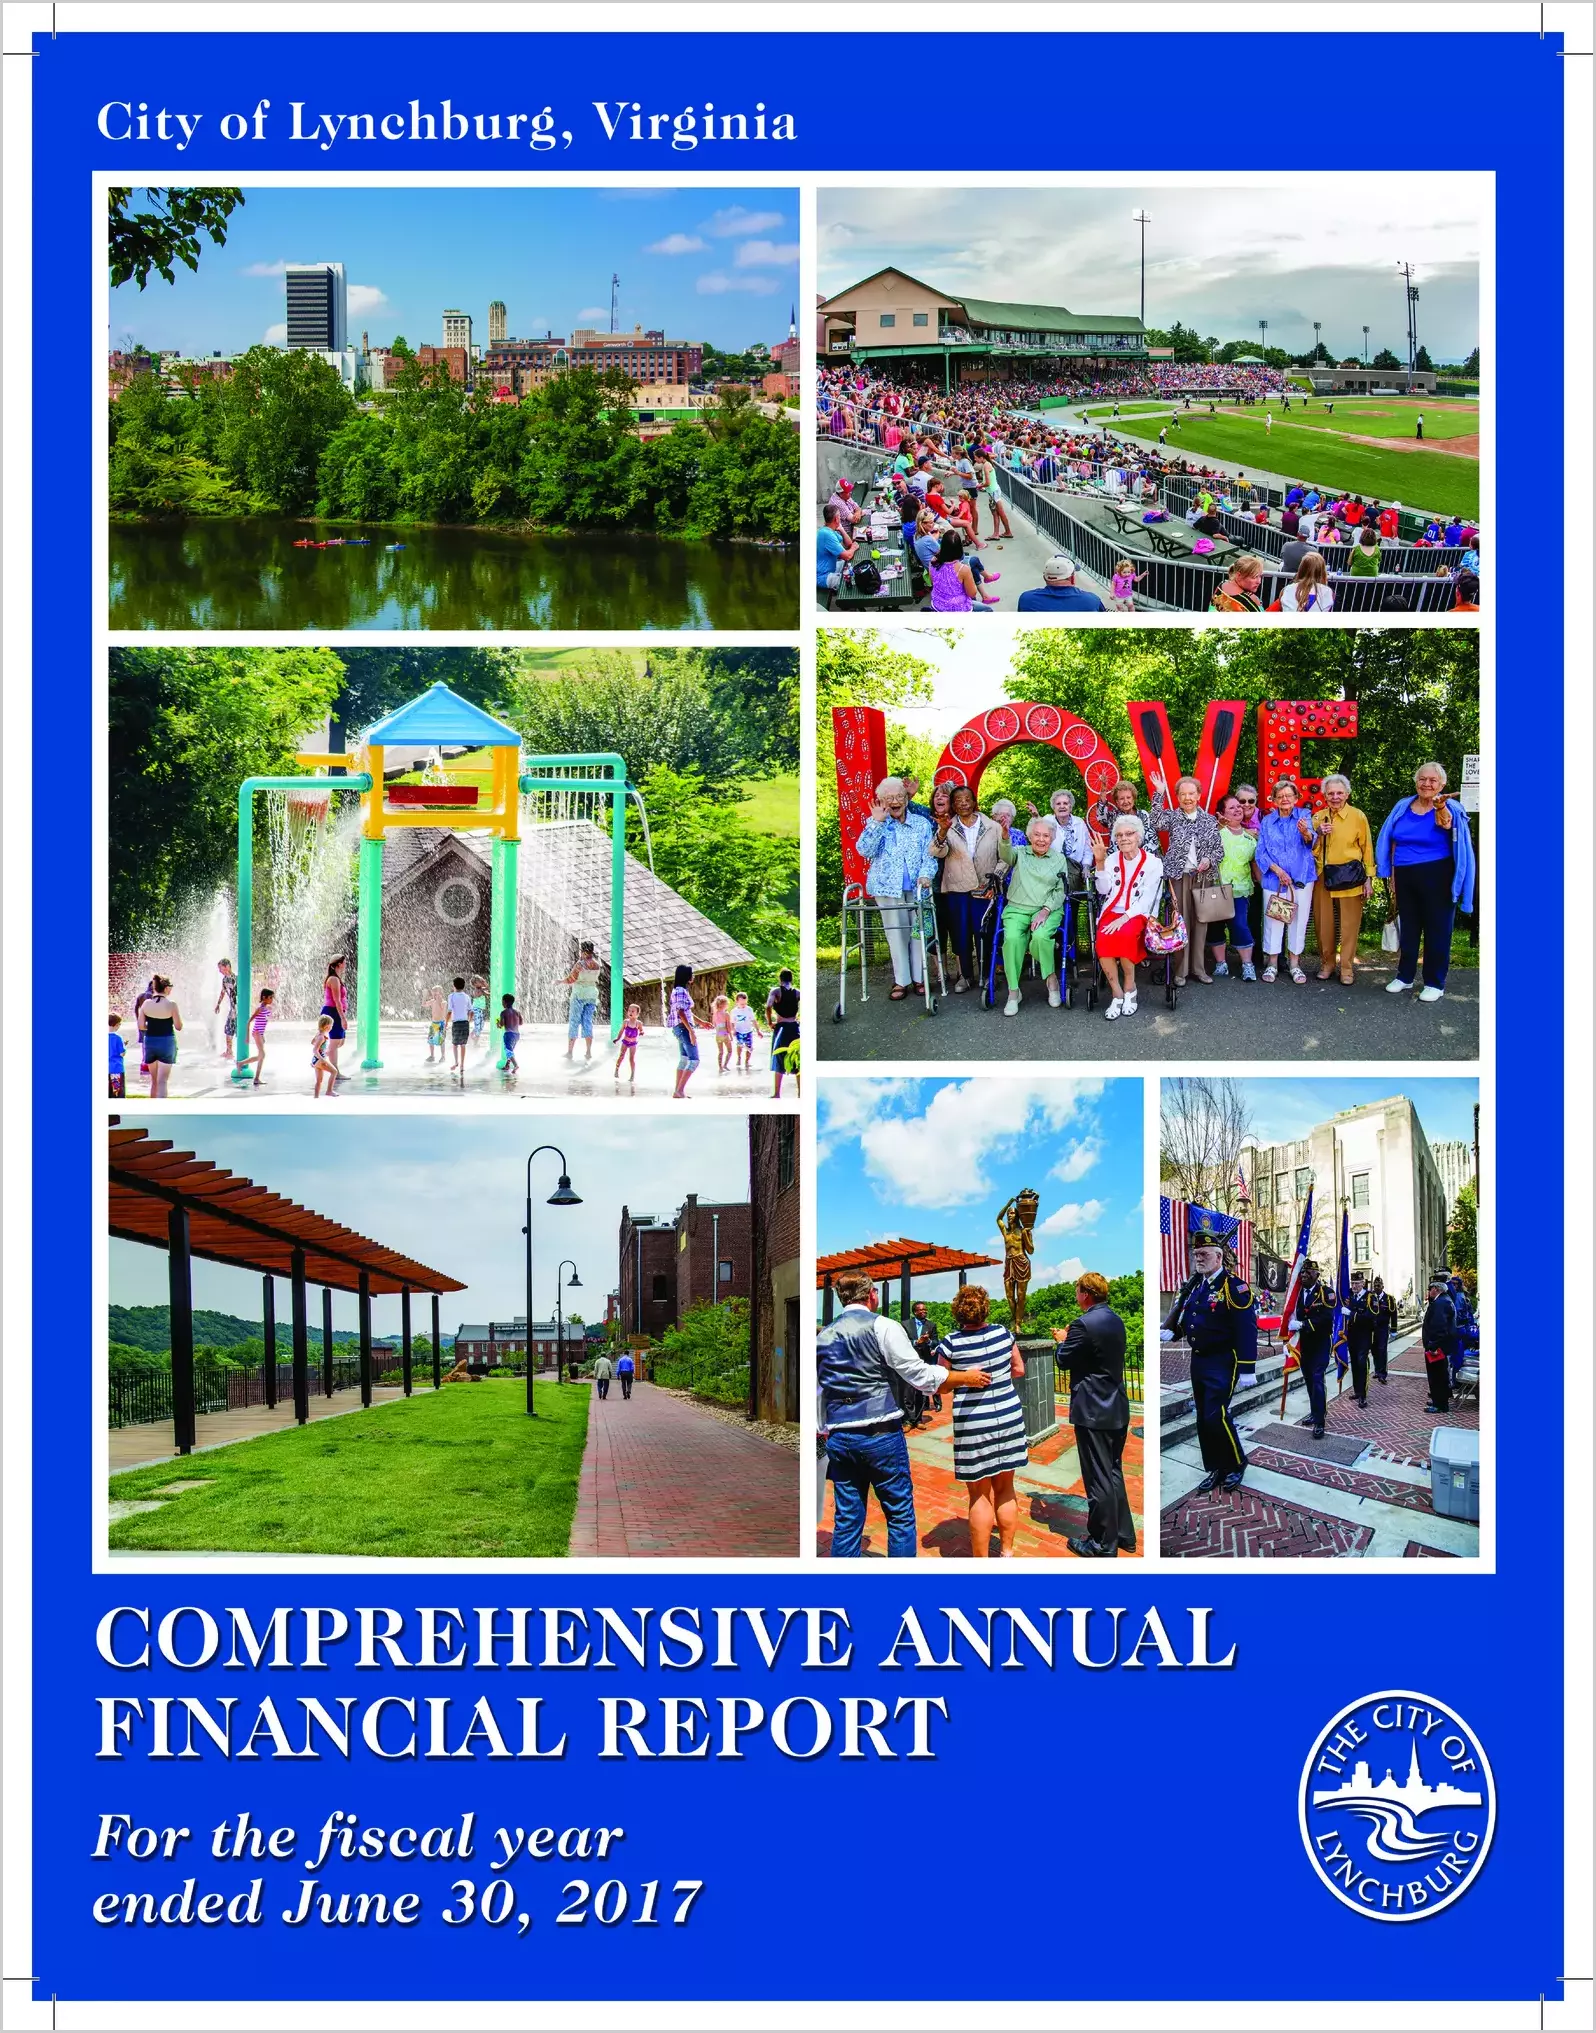 2017 Annual Financial Report for City of Lynchburg